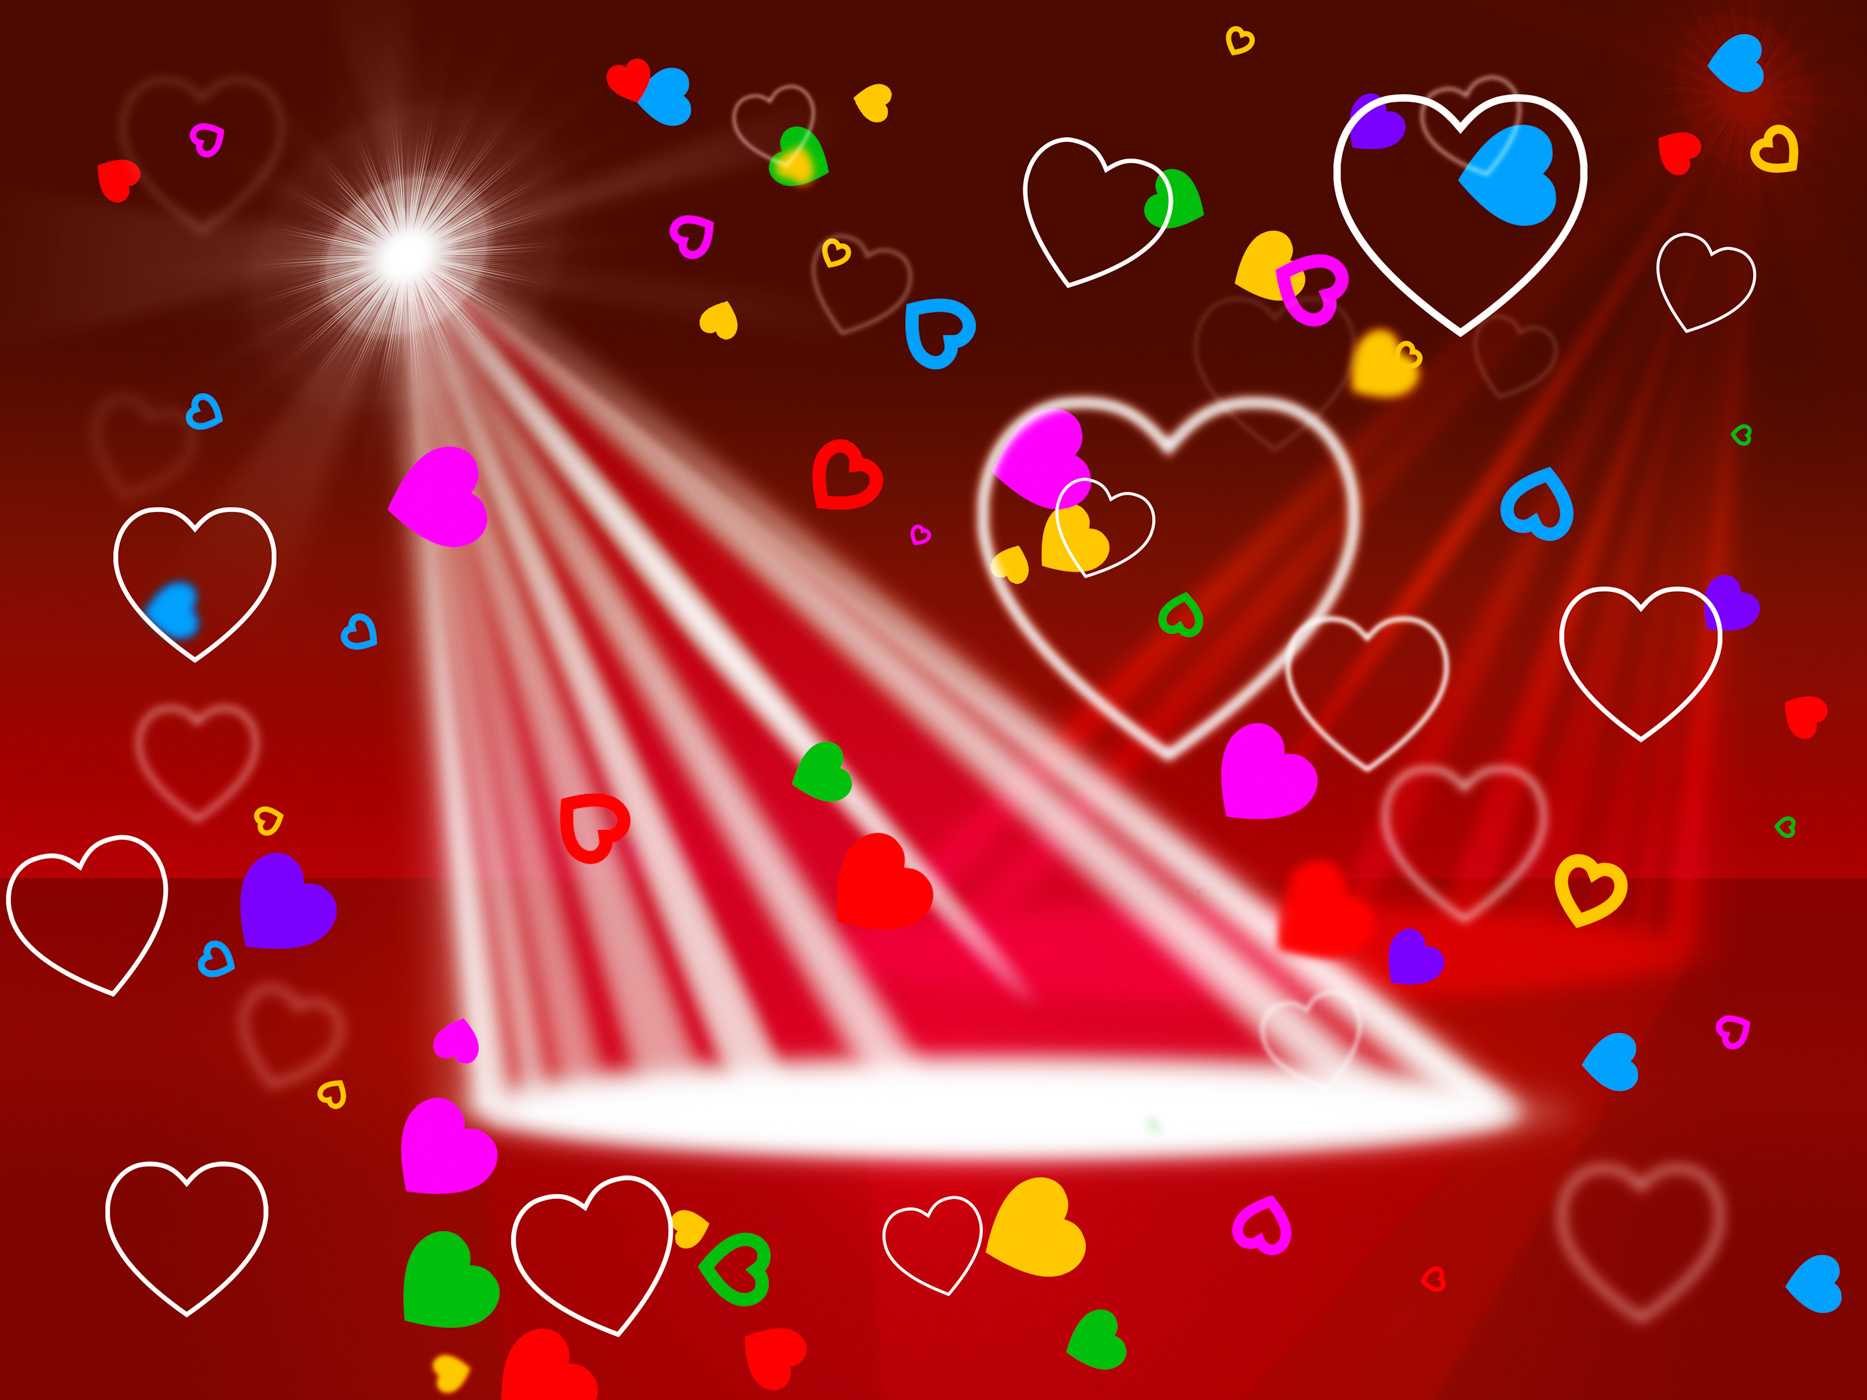 Heart spotlight shows valentines day and affection photo